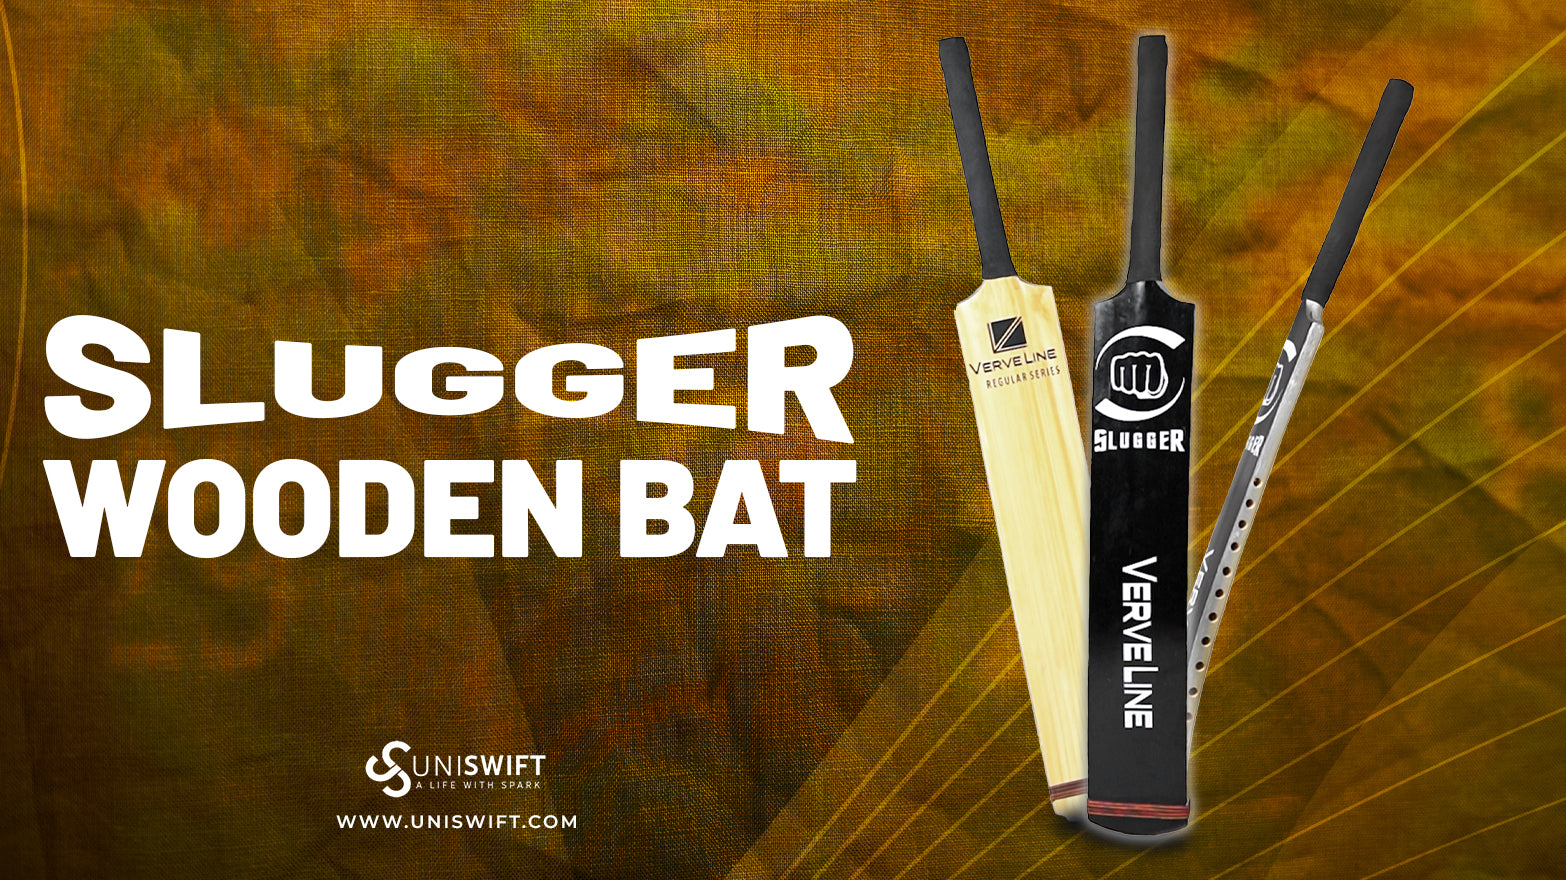 Master Your Game with Uni-Swift's Slugger Cricket Gear